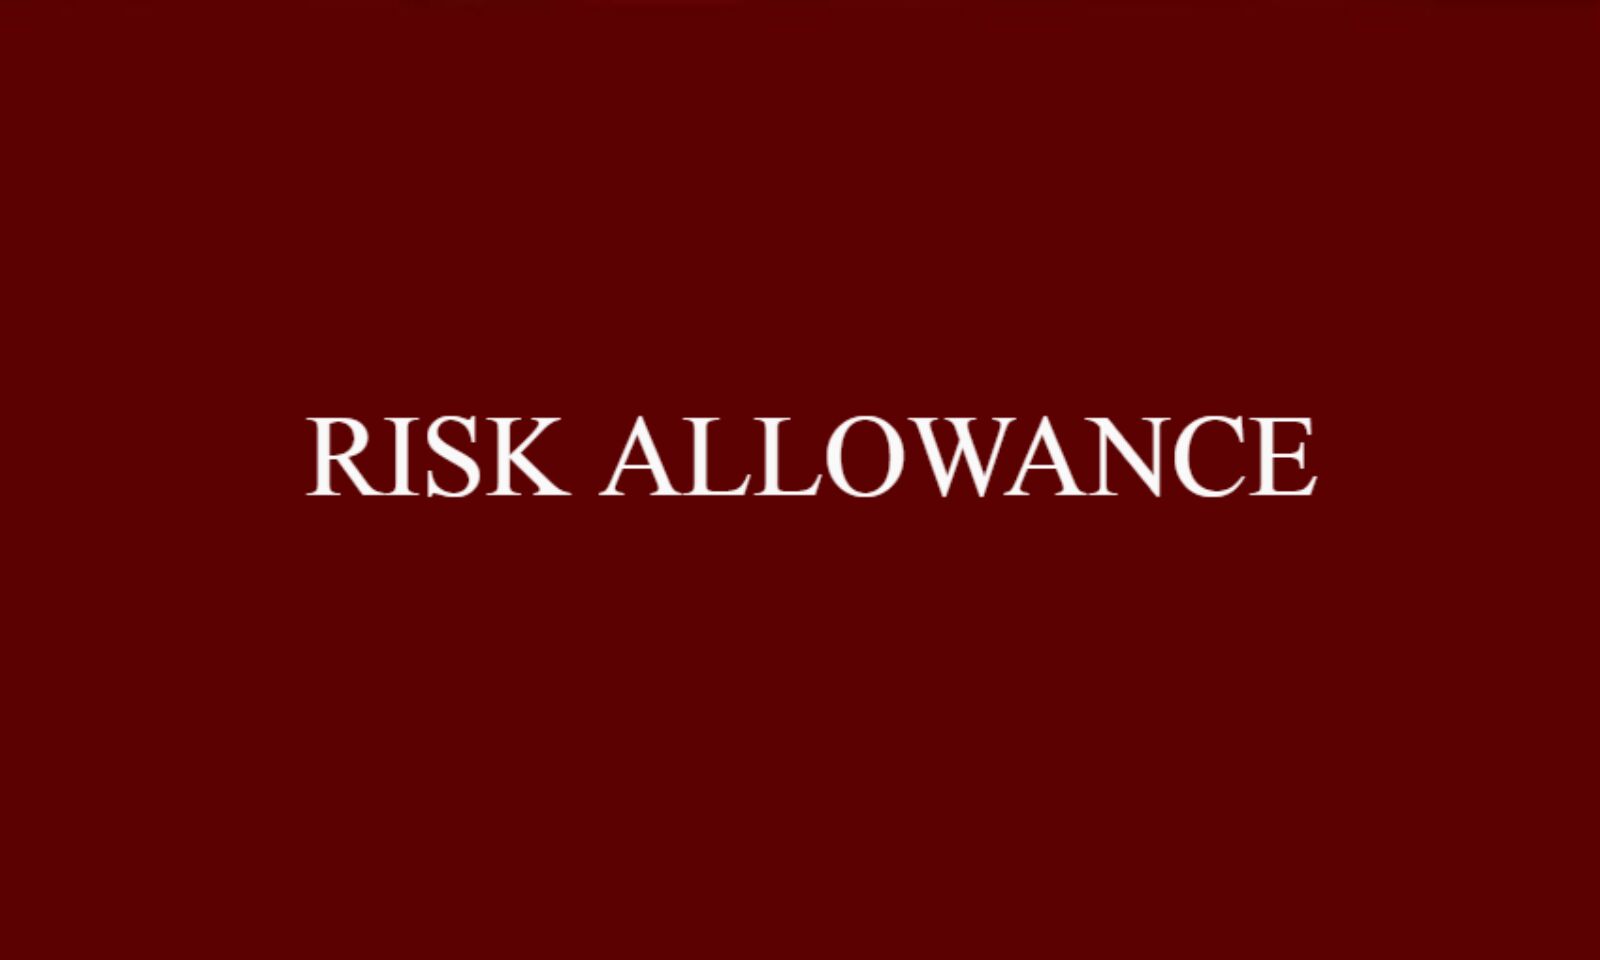 7th CPC - Consolidated instructions on Risk Allowance to Central Government employees: DOPT